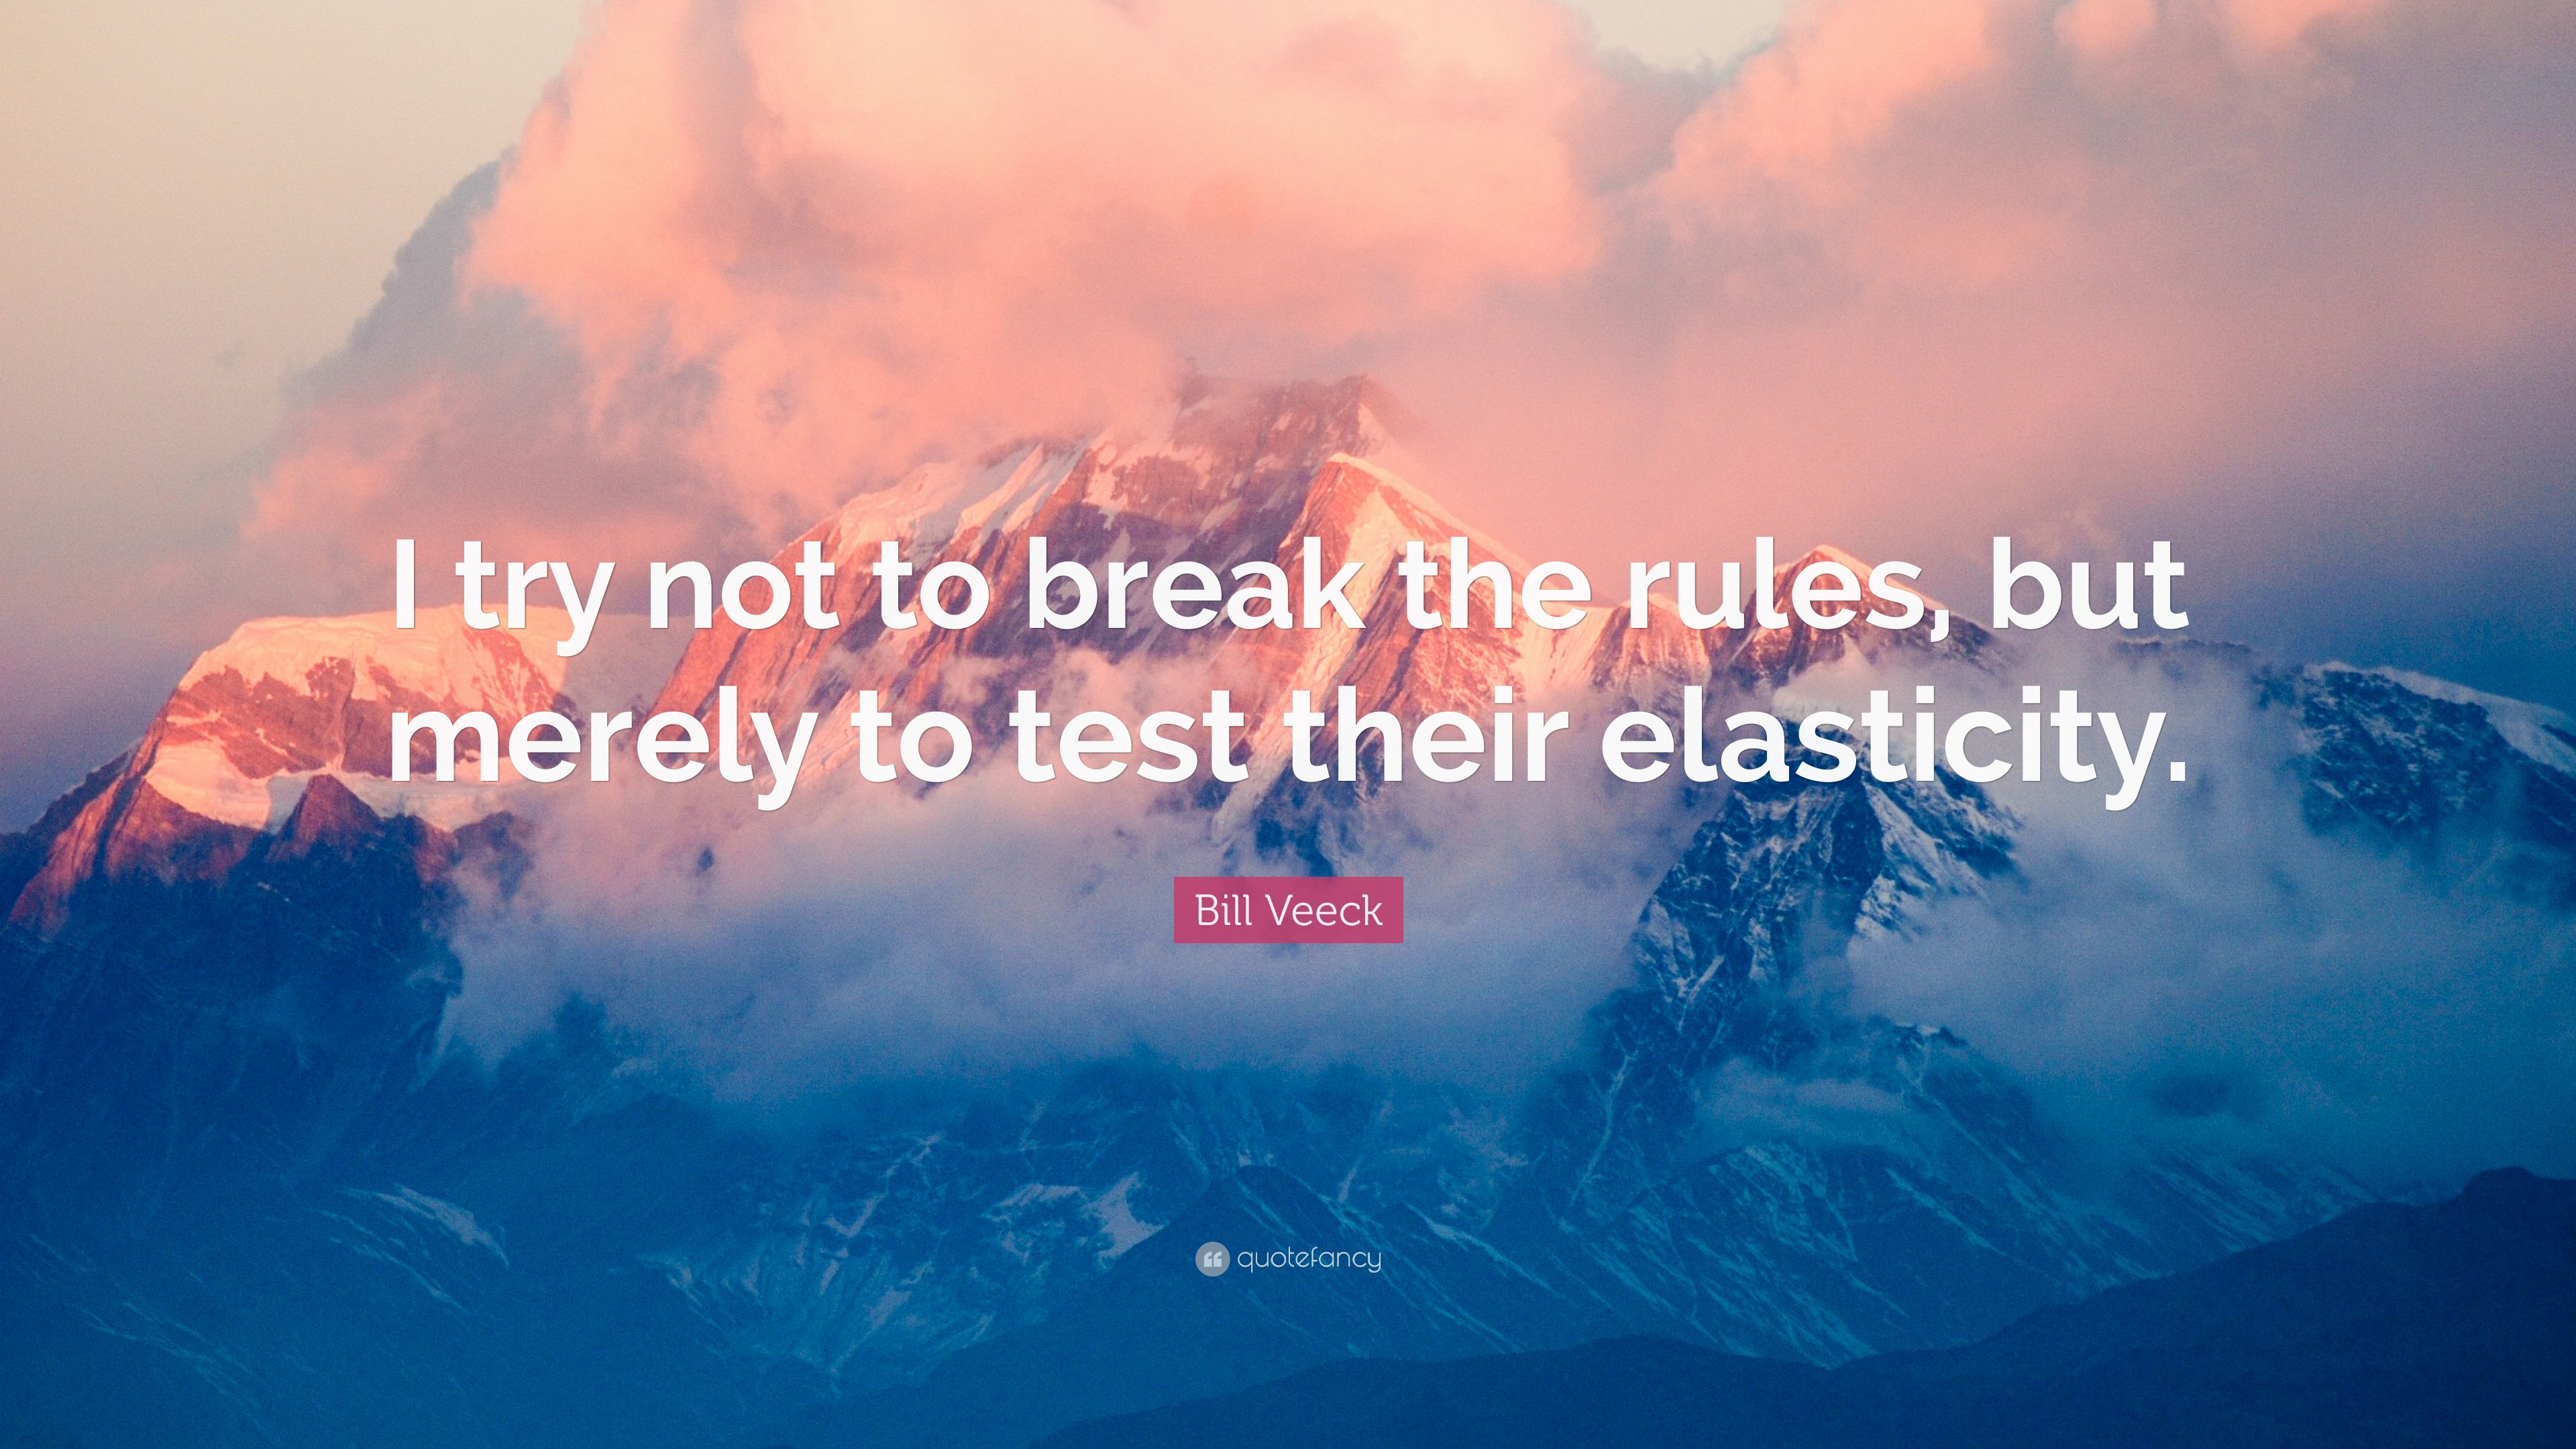 Bill Veeck Quote: “I try not to break the rules, but merely to